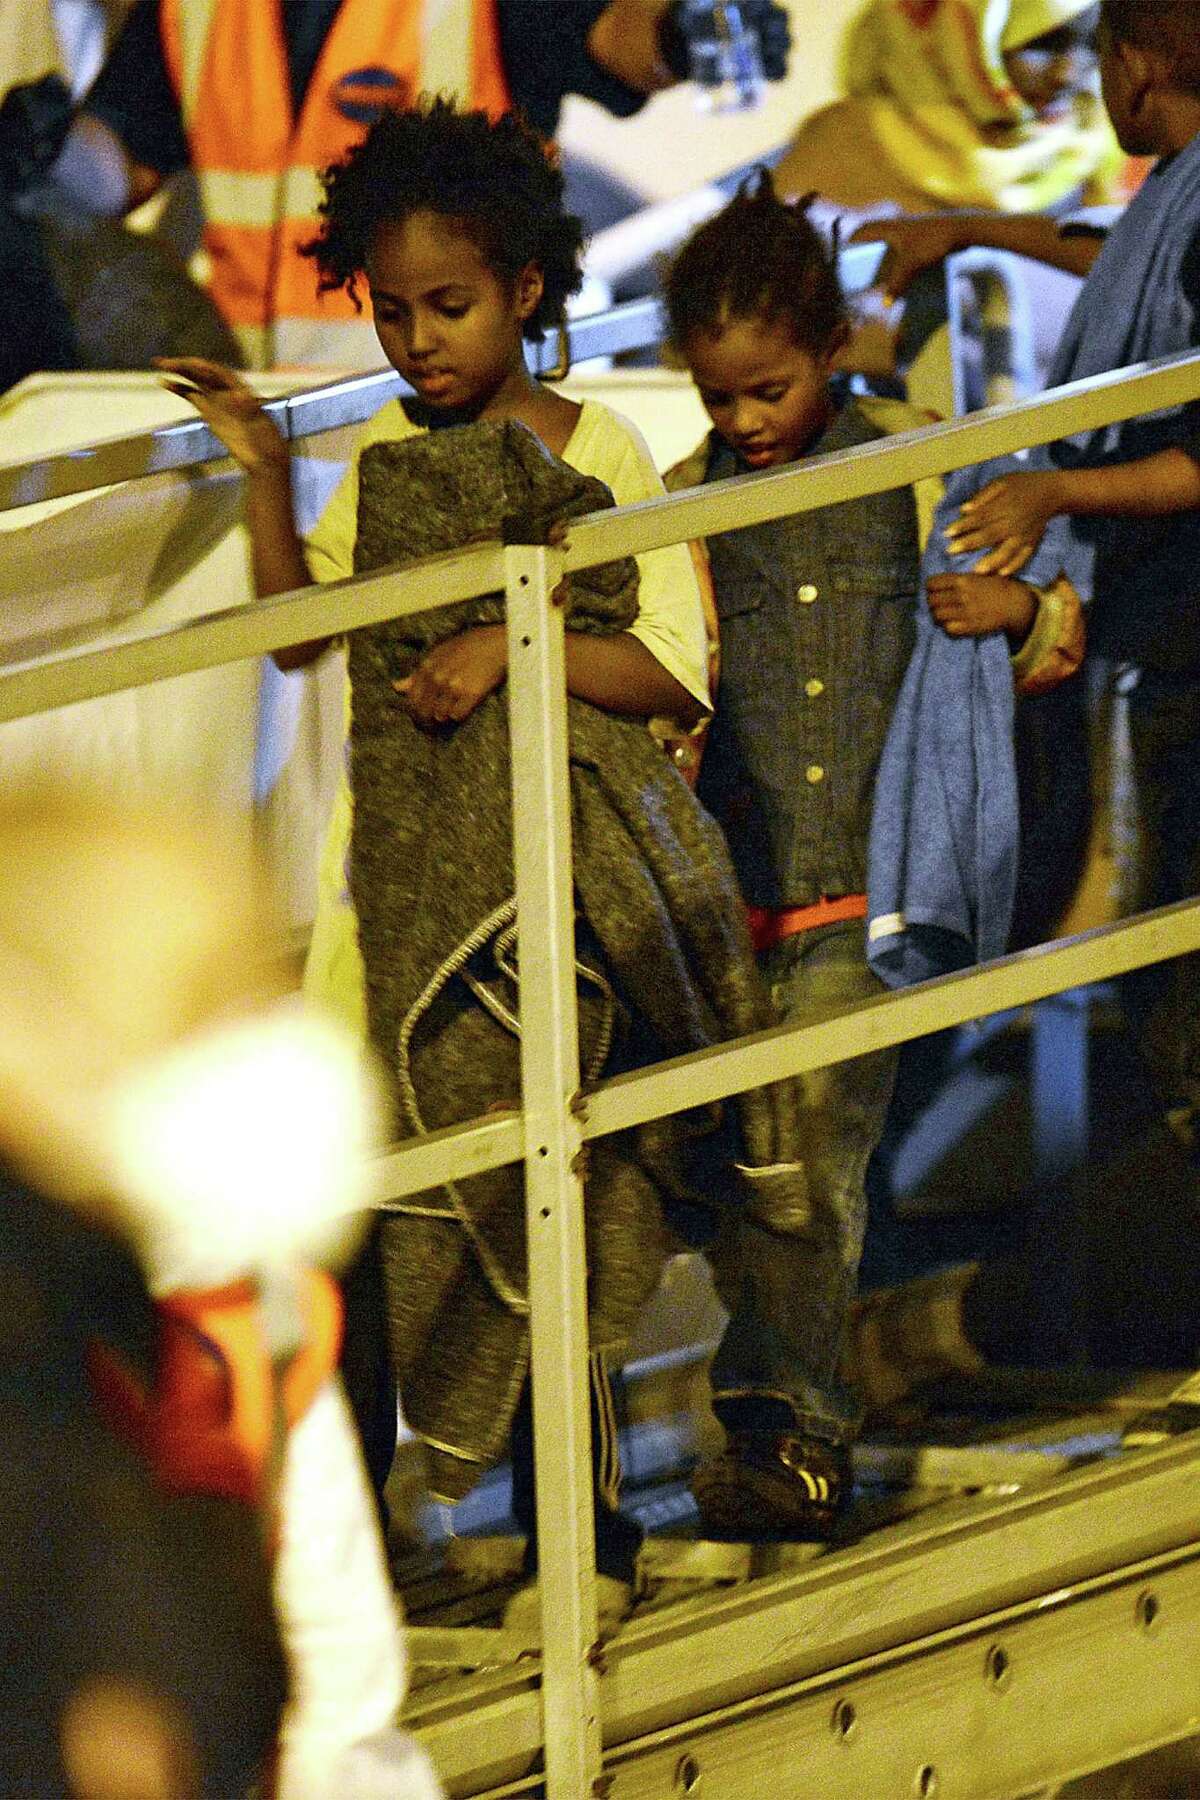 Young migrants disembark from the "Phoenix" ship upon their arrival in the port of Augusta on the eastern coast of Sicily on June 7, 2015. Italy's wealthy North vowed that it would refuse to accommodate any more migrants as thousands more were rescued in the Mediterranean by a multinational flotilla of ships. As another frantic weekend of rescues unfolded, nearly 6,000 people were plucked to safety from packed fishing boats and rubber dinghies off Libya. AFP PHOTO / GIOVANNI ISOLINOGIOVANNI ISOLINO/AFP/Getty Images